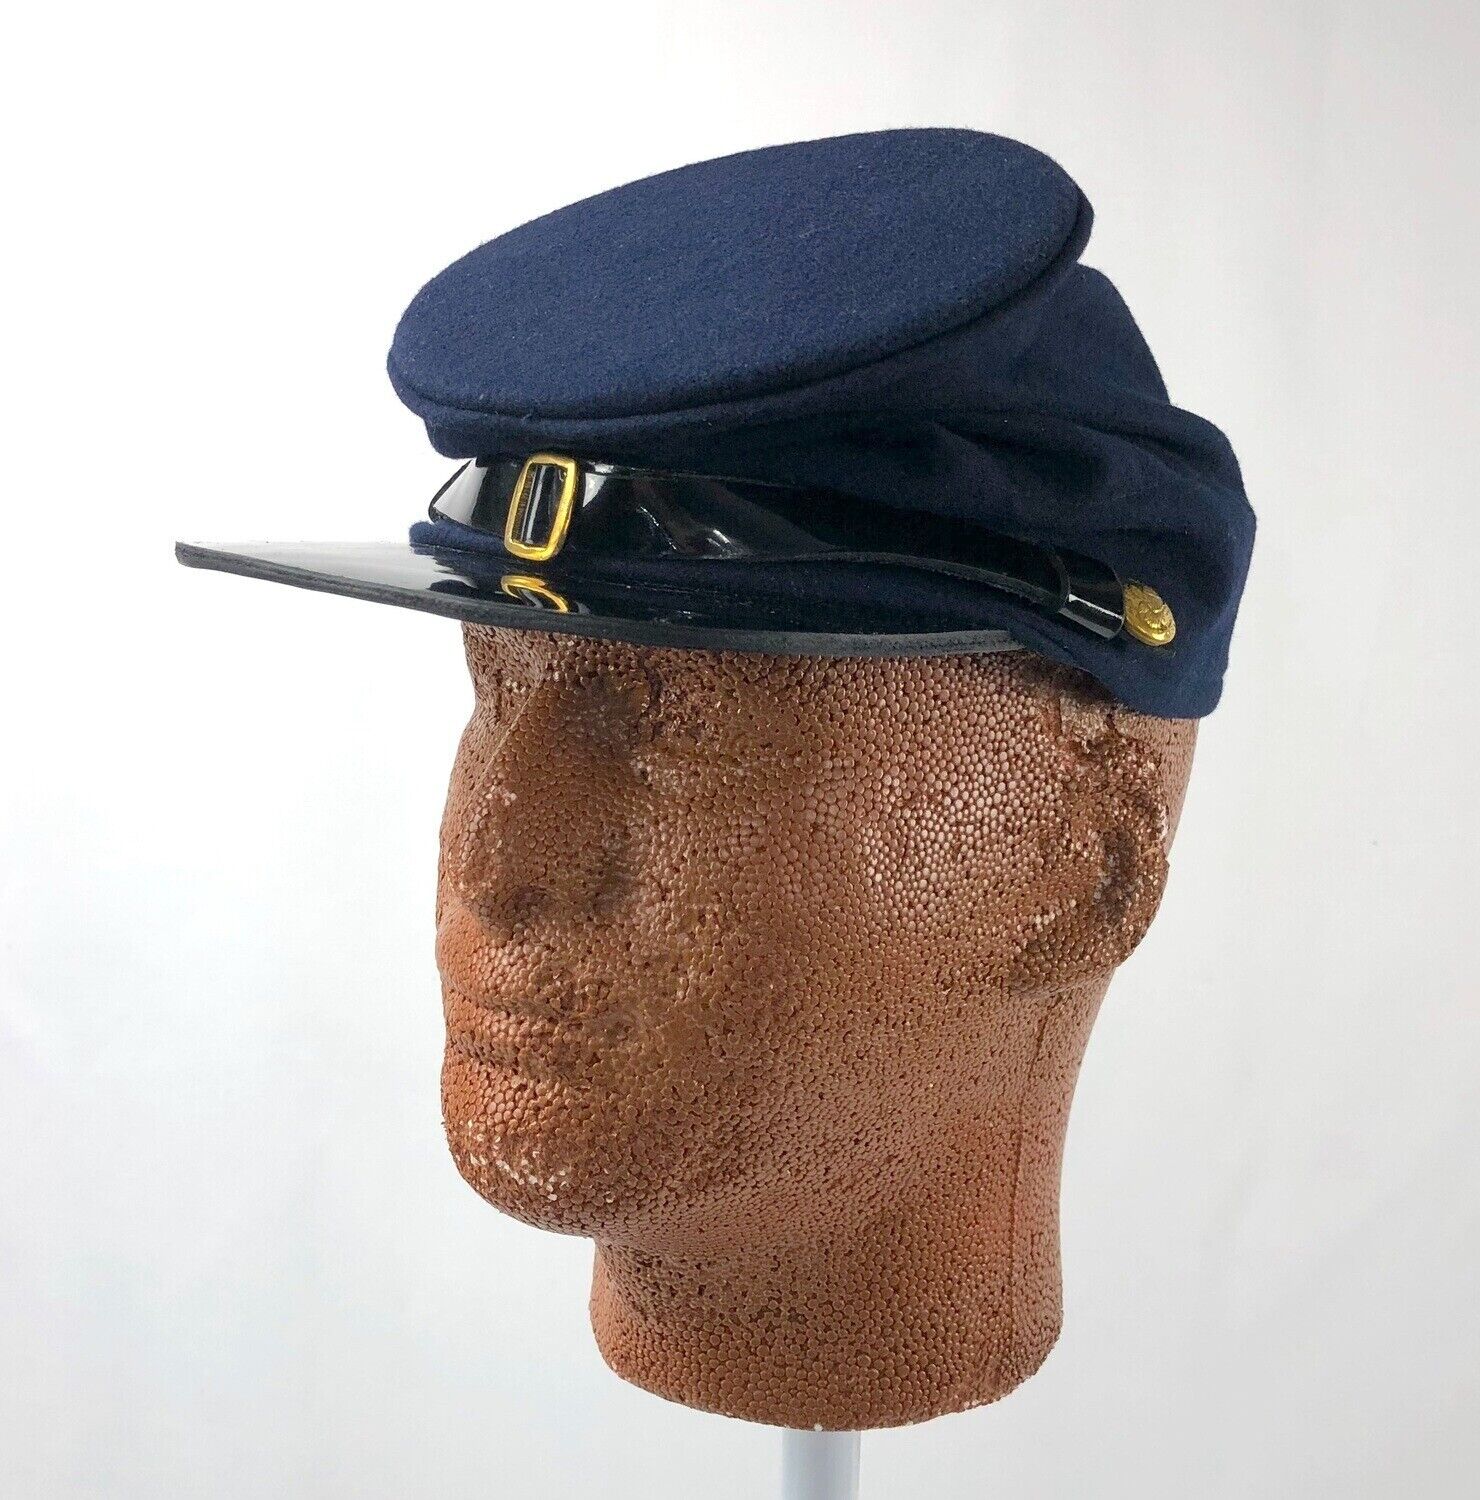 Civil War US Army Pattern 1858 Forage Cap - Union Bummer - Size Small